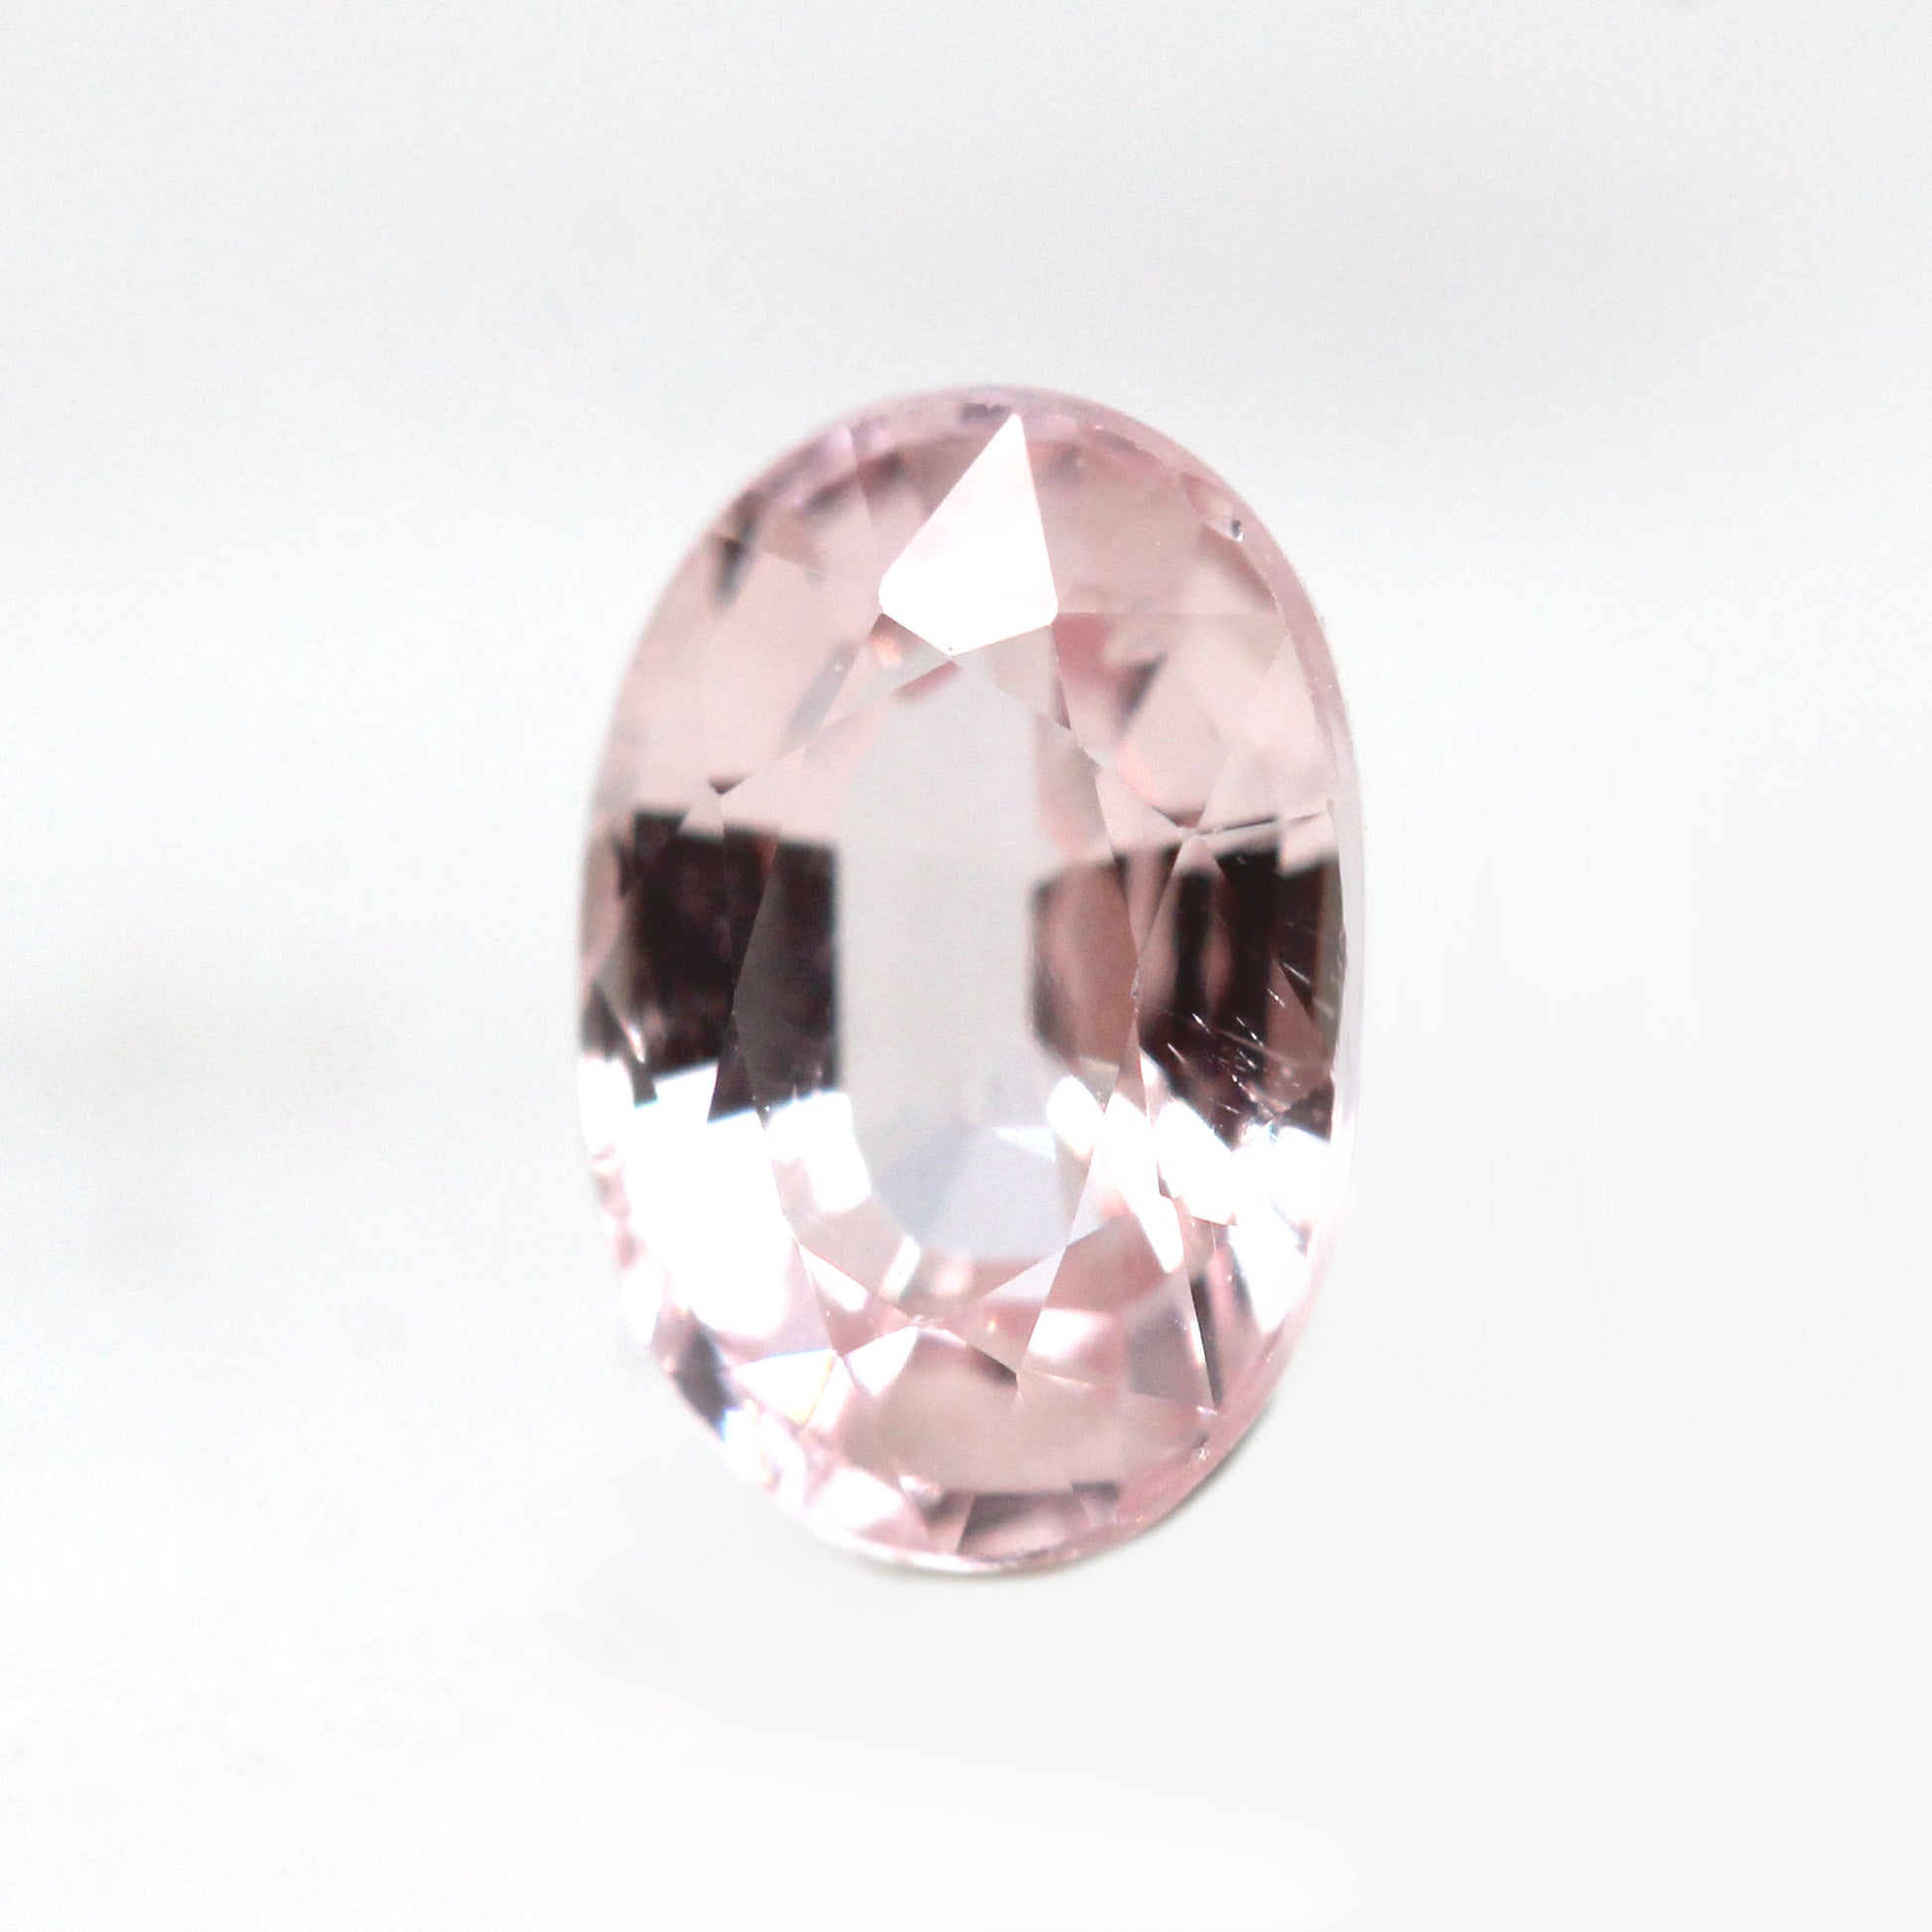 0.77 Carat Clear Light Pink Oval Montana Sapphire for Custom Work - Inventory Code PSO077 - Midwinter Co. Alternative Bridal Rings and Modern Fine Jewelry